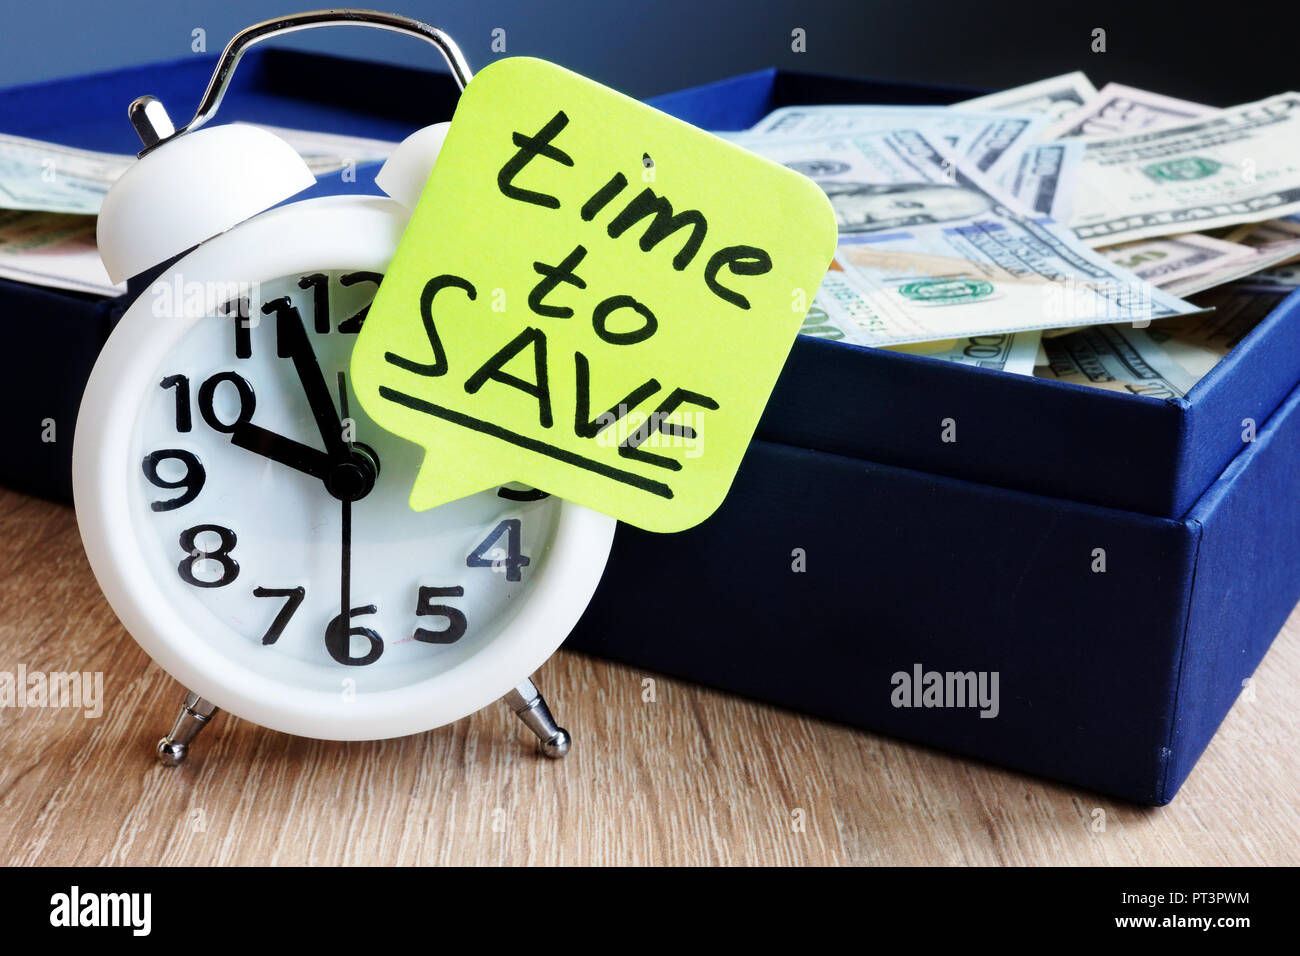 Time to Save. Alarm clock and money on a desk. Stock Photo